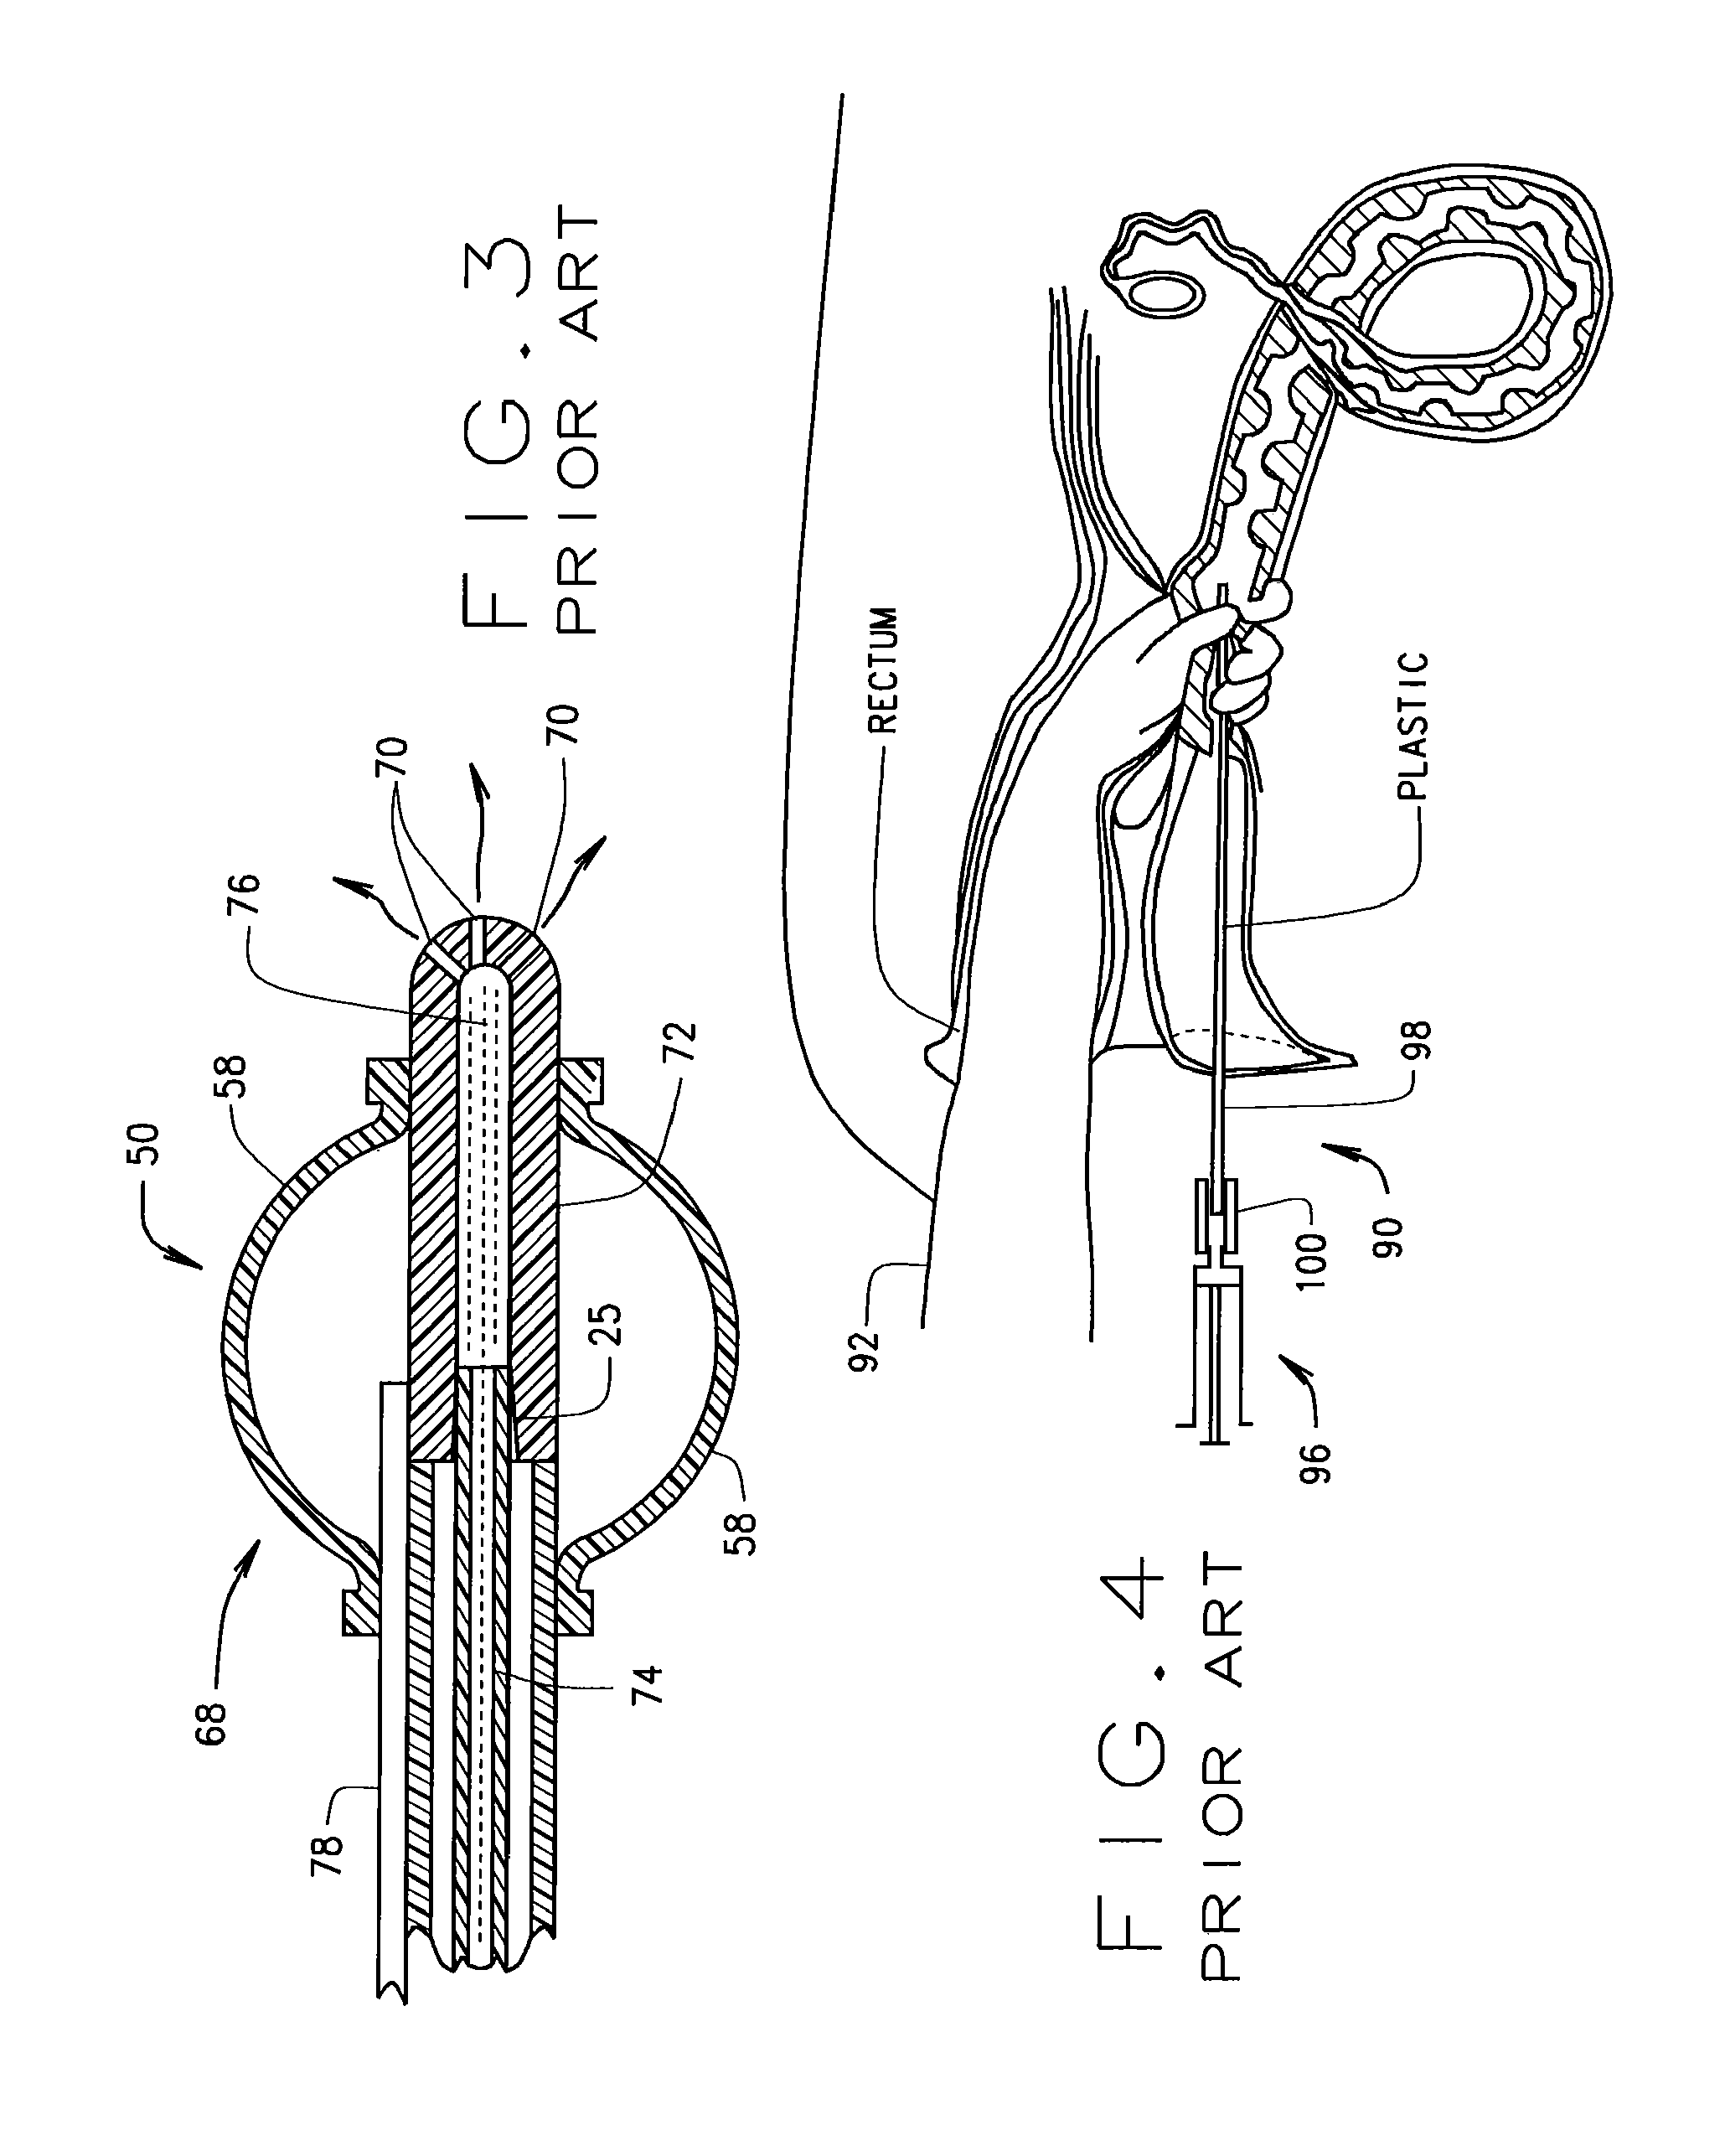 Method and apparatus to reduce the number of sperm used in artificial insemination of cattle